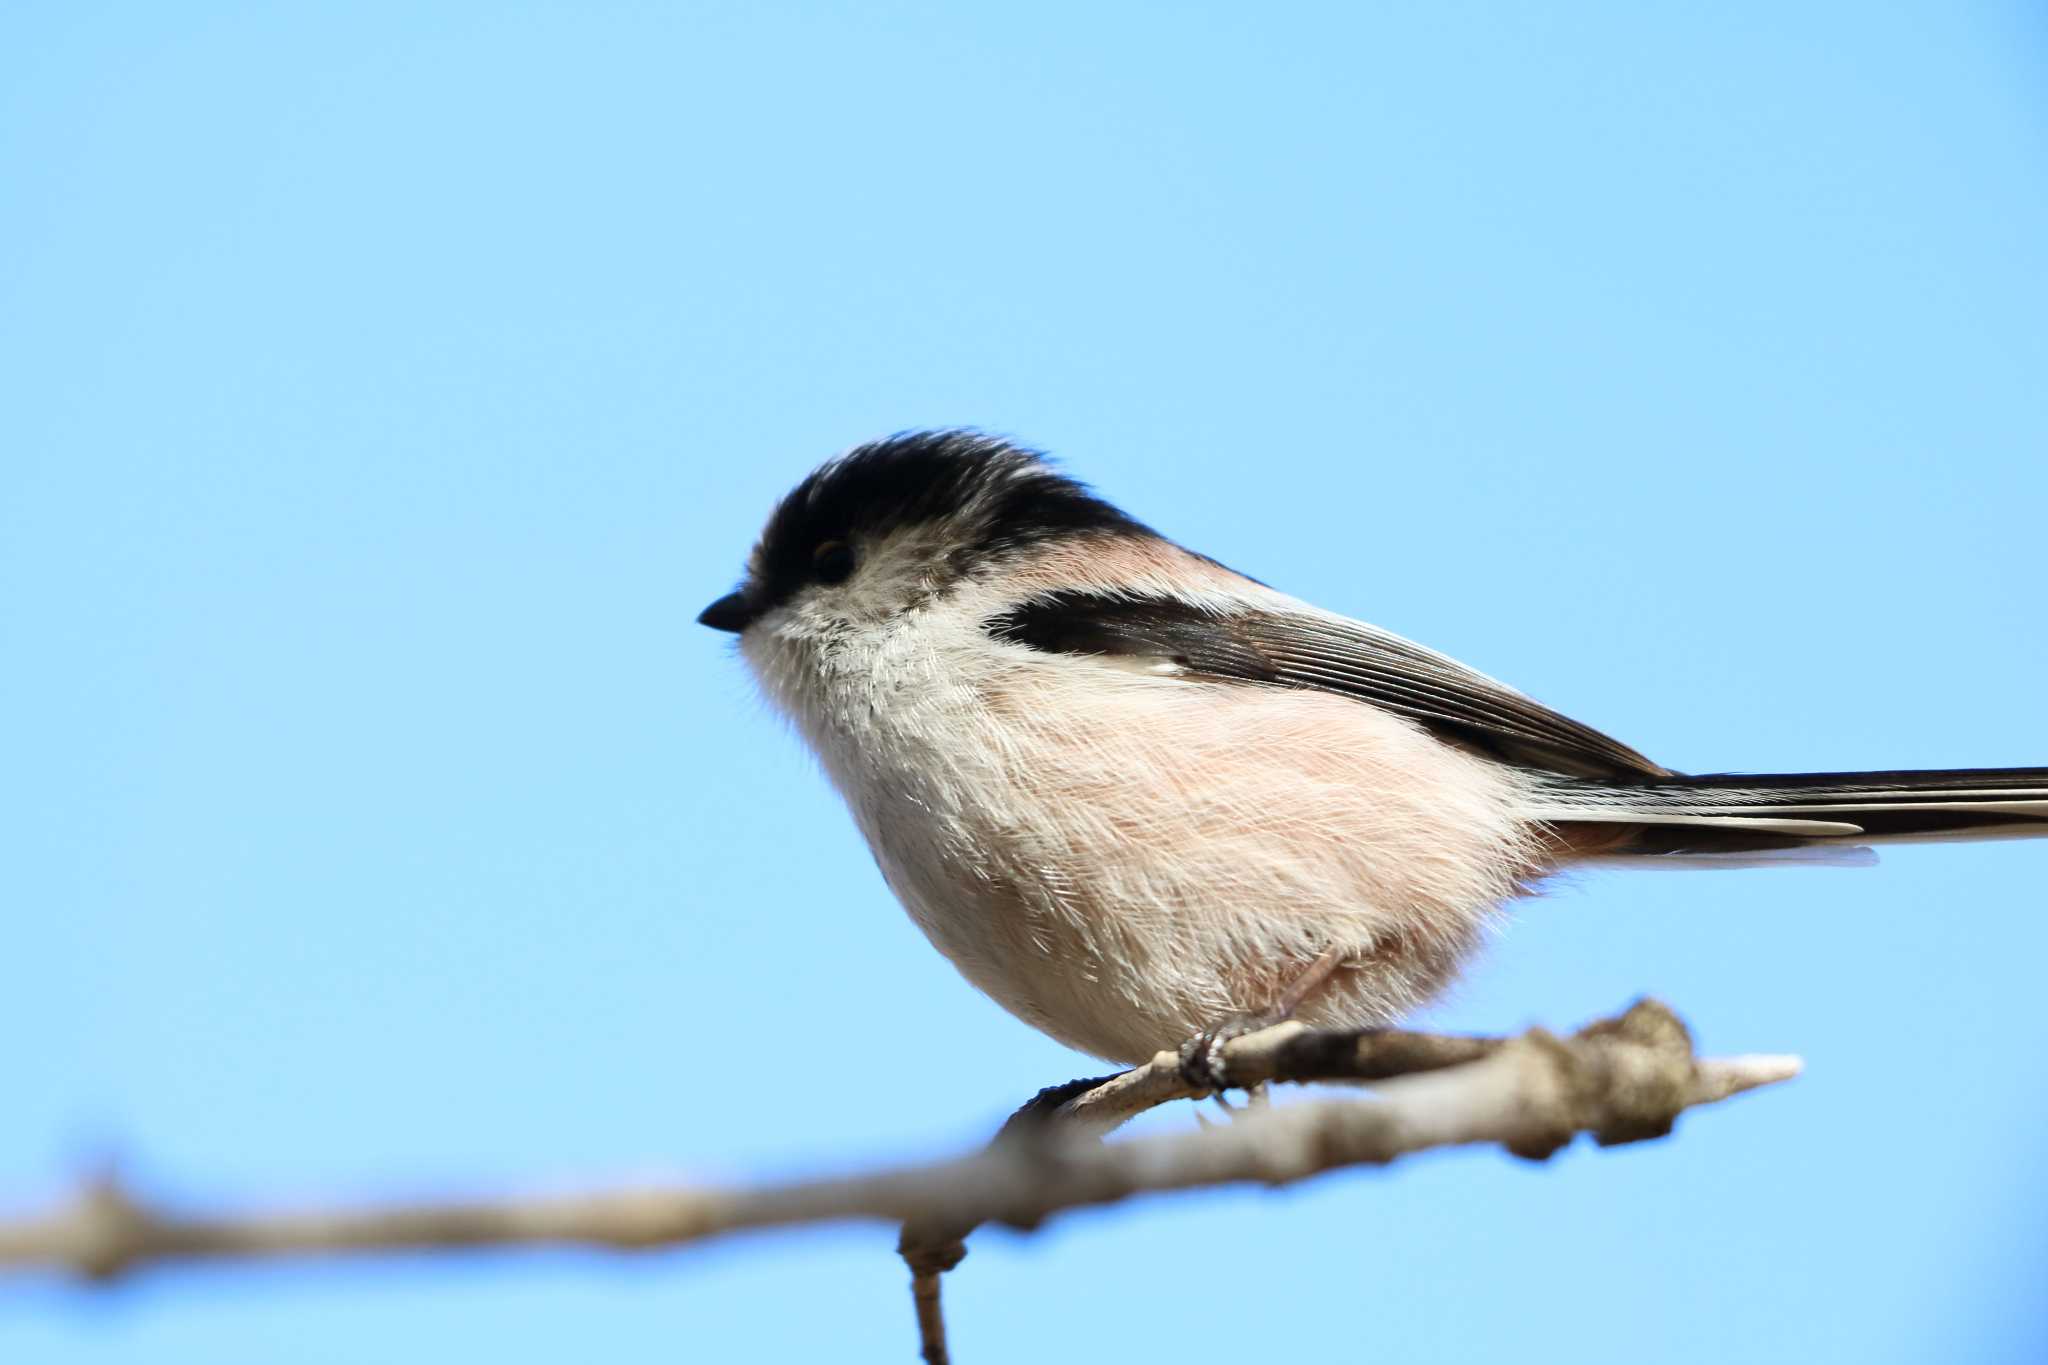 Photo of Long-tailed Tit at 平谷川 by いわな